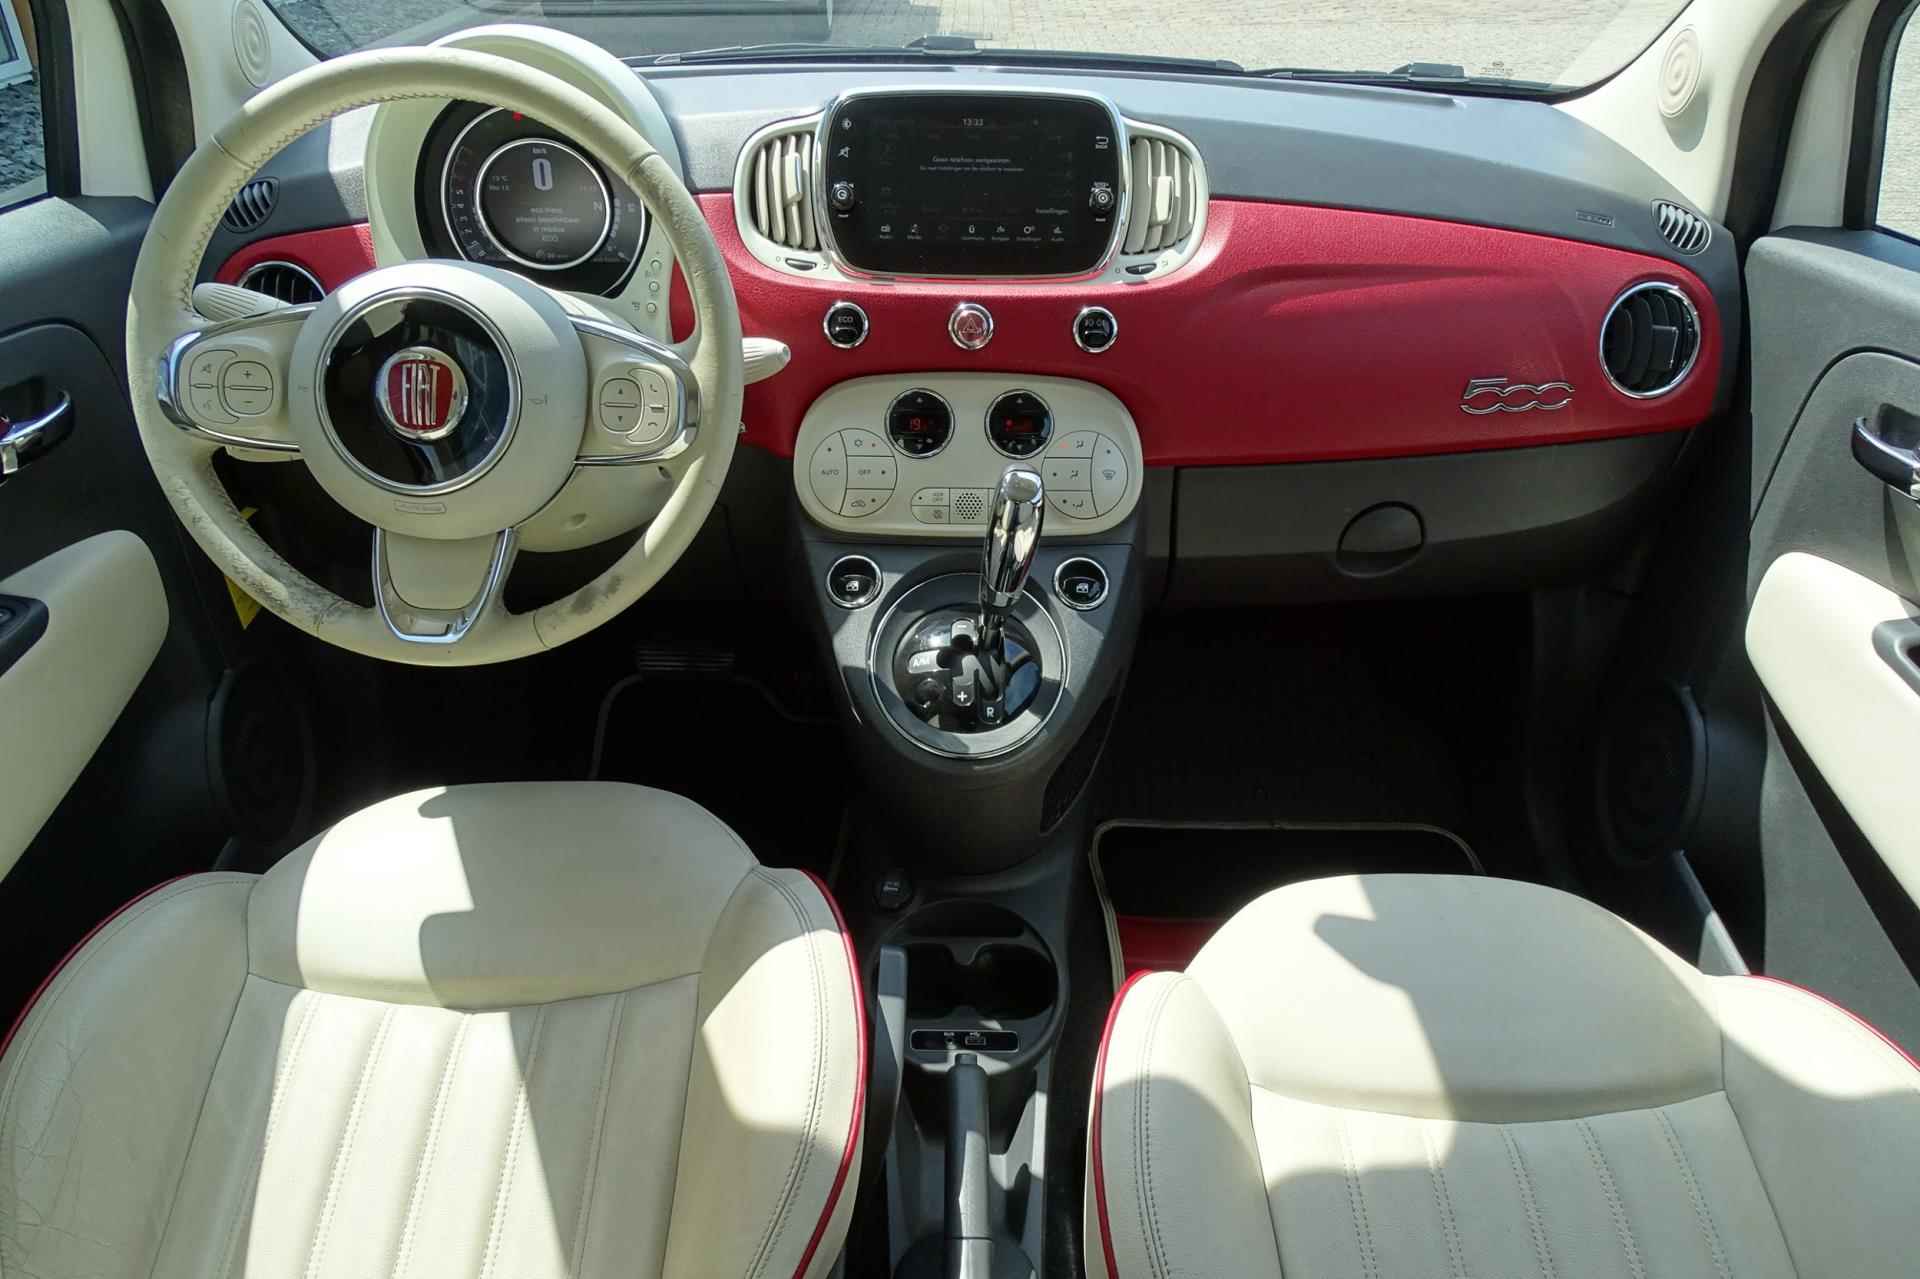 Fiat 500 C 0.9 TwinAir Turbo Forever Young - 9/41